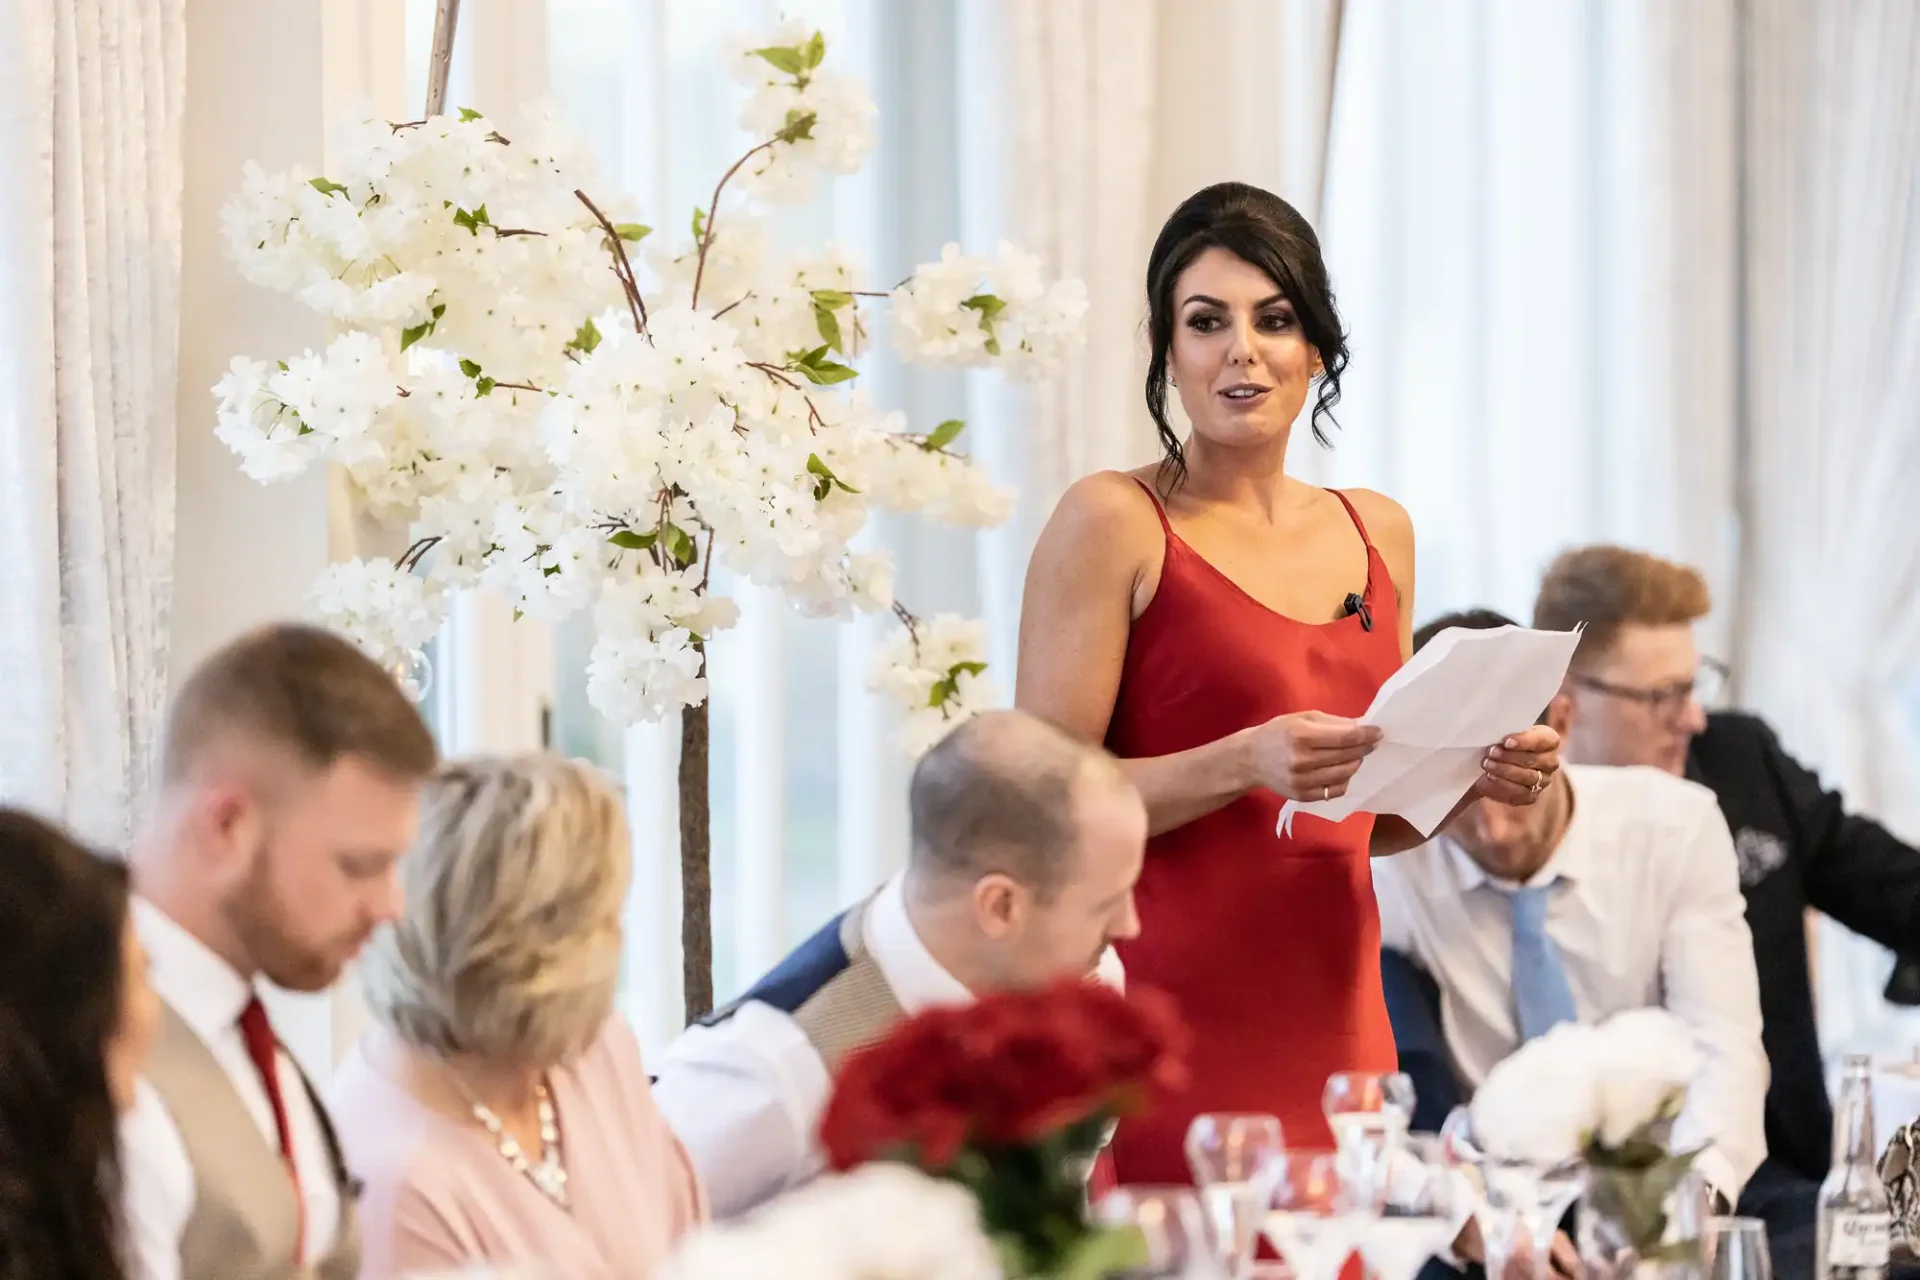 Woman in red dress giving a speech at a wedding reception, holding a paper, with guests seated at tables listening.